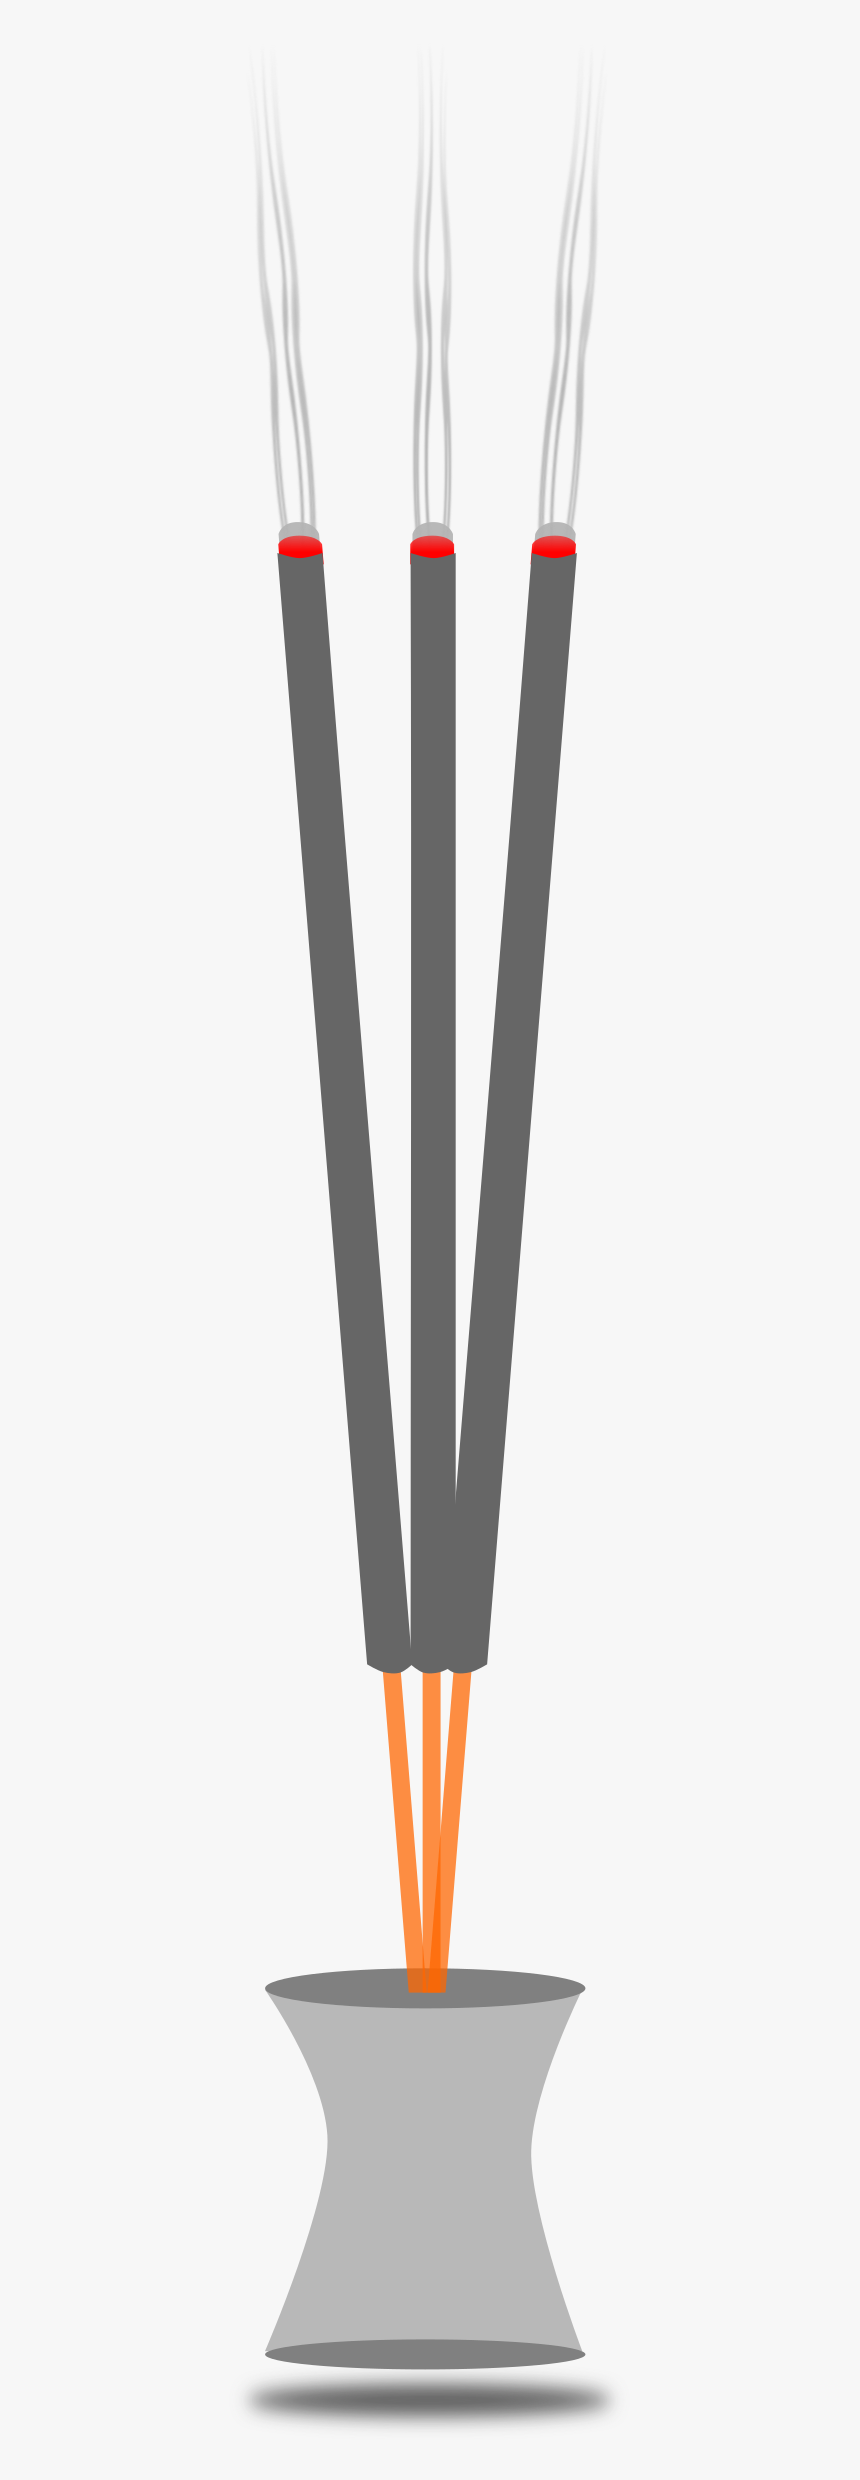 Incense Stick Png